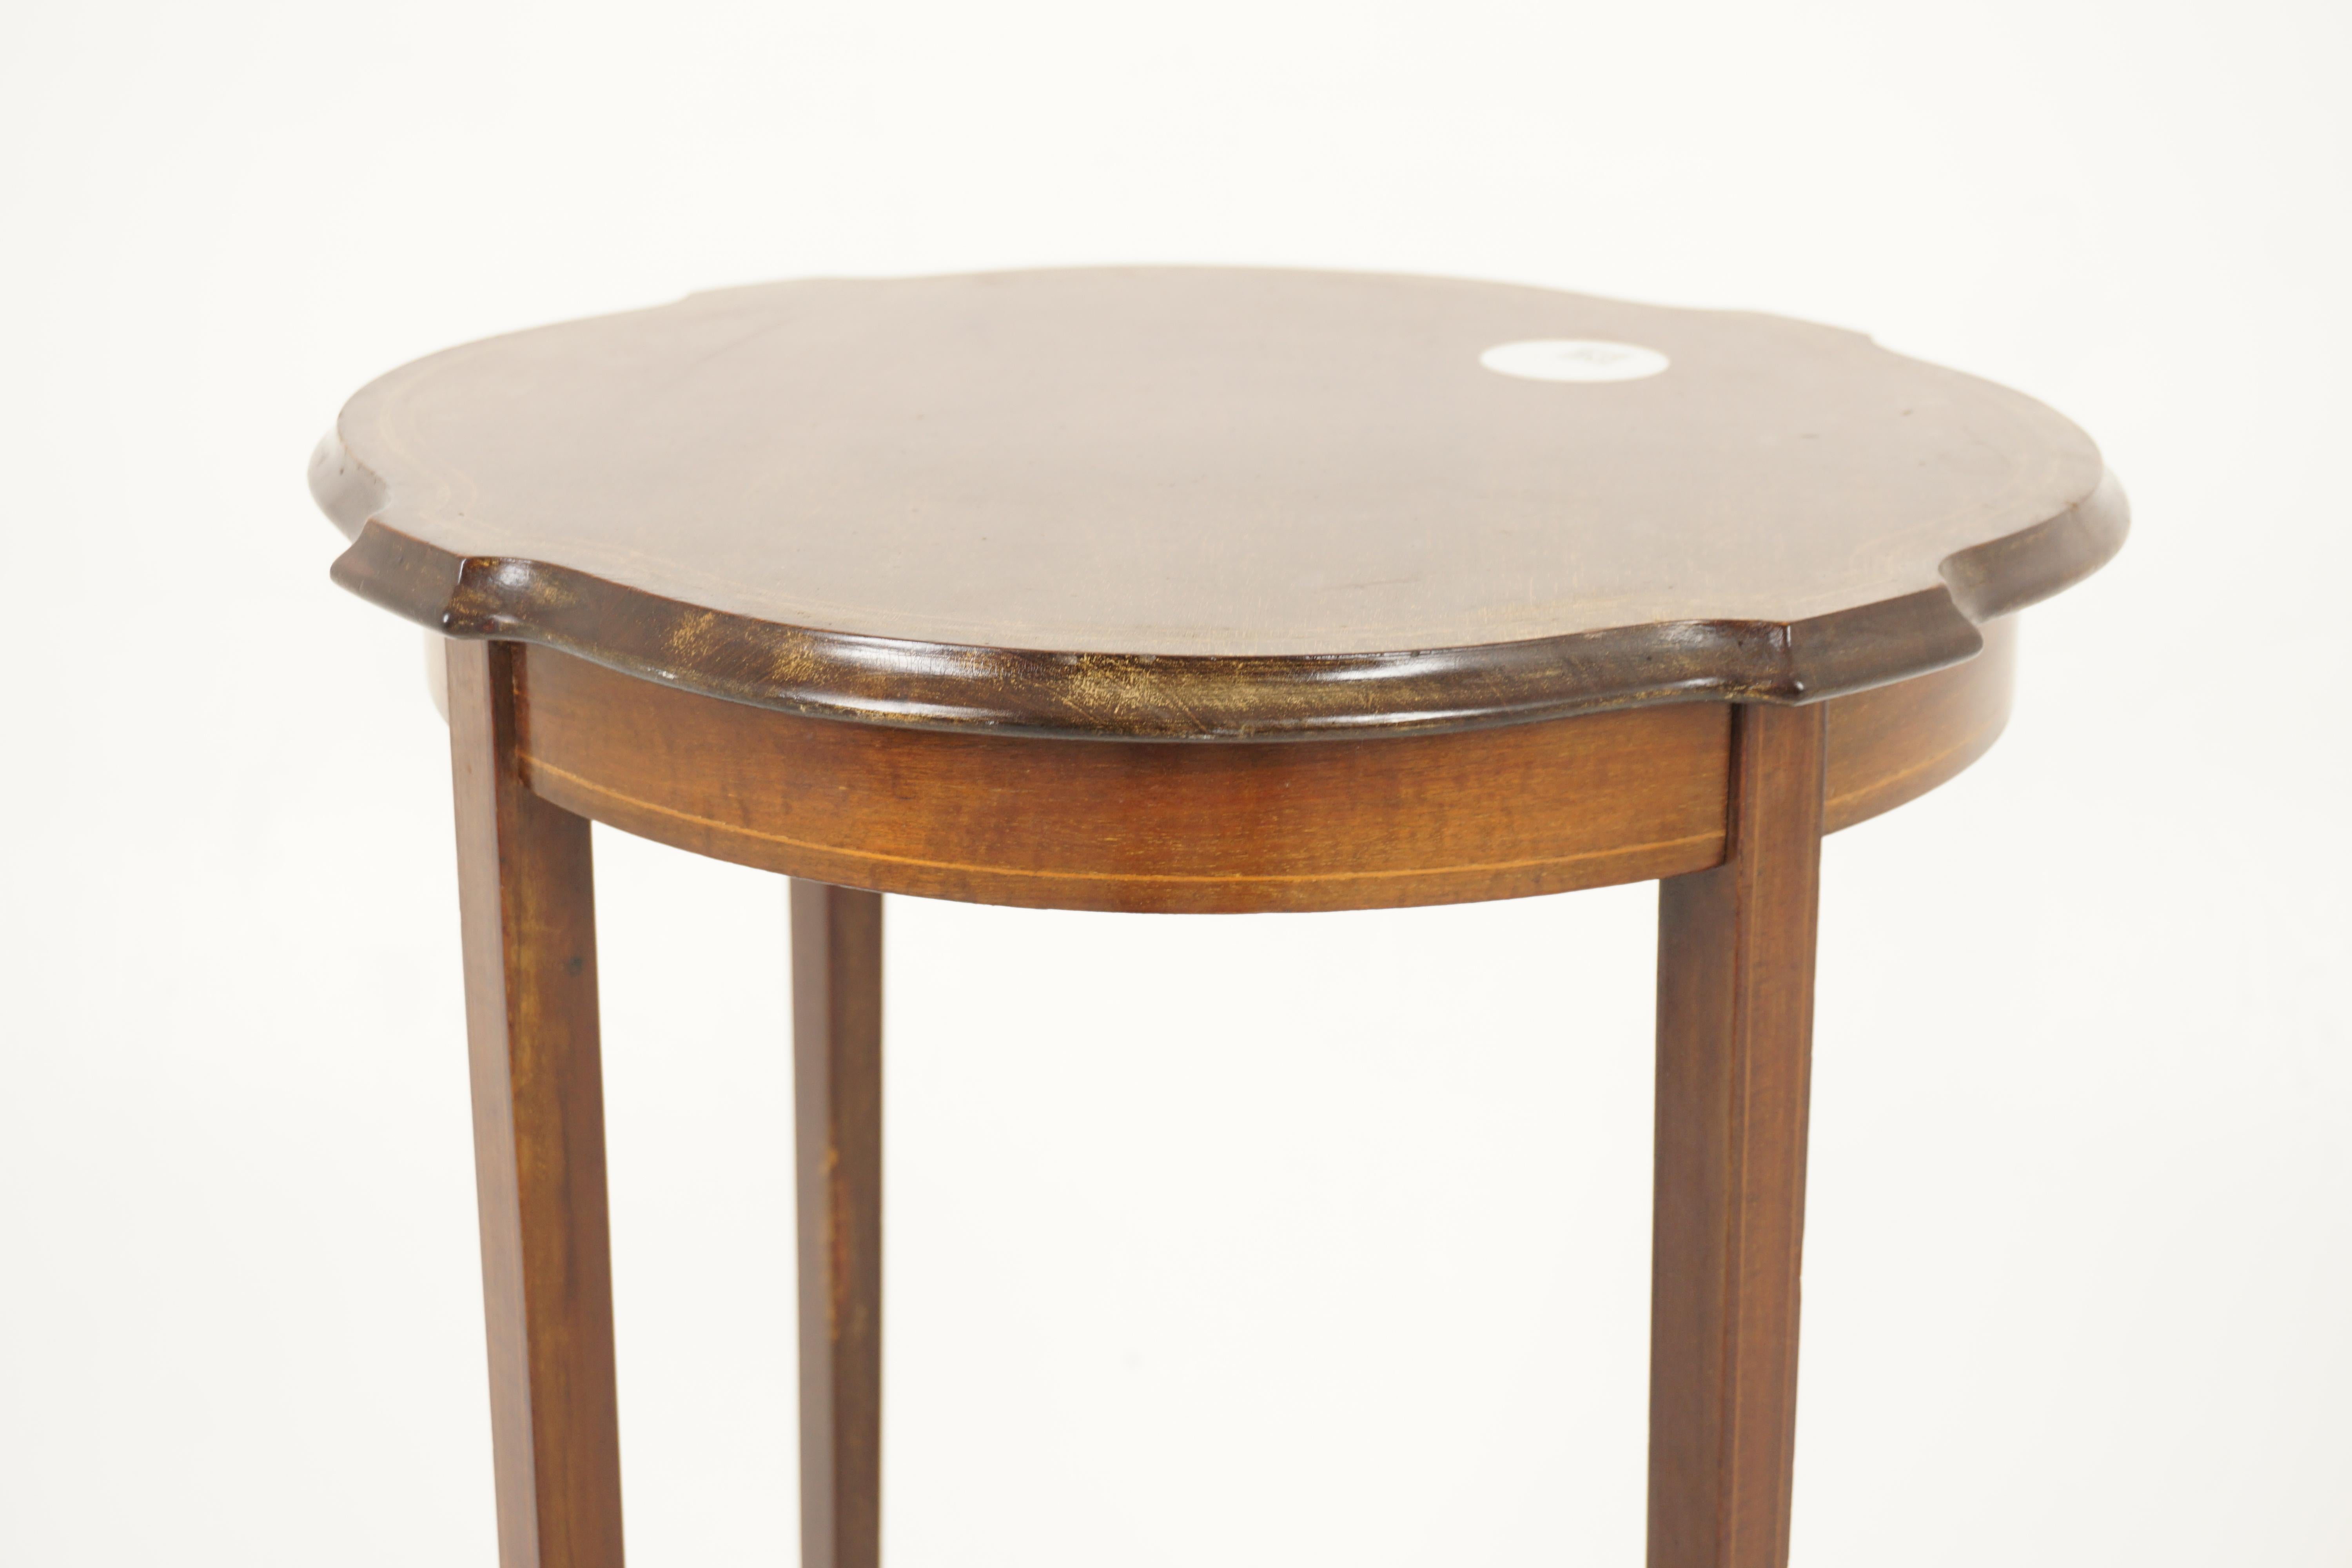 Early 20th Century Antique Inlaid Walnut Occasional Table, Lamp, Plant Stand, Scotland 1900, H1124 For Sale